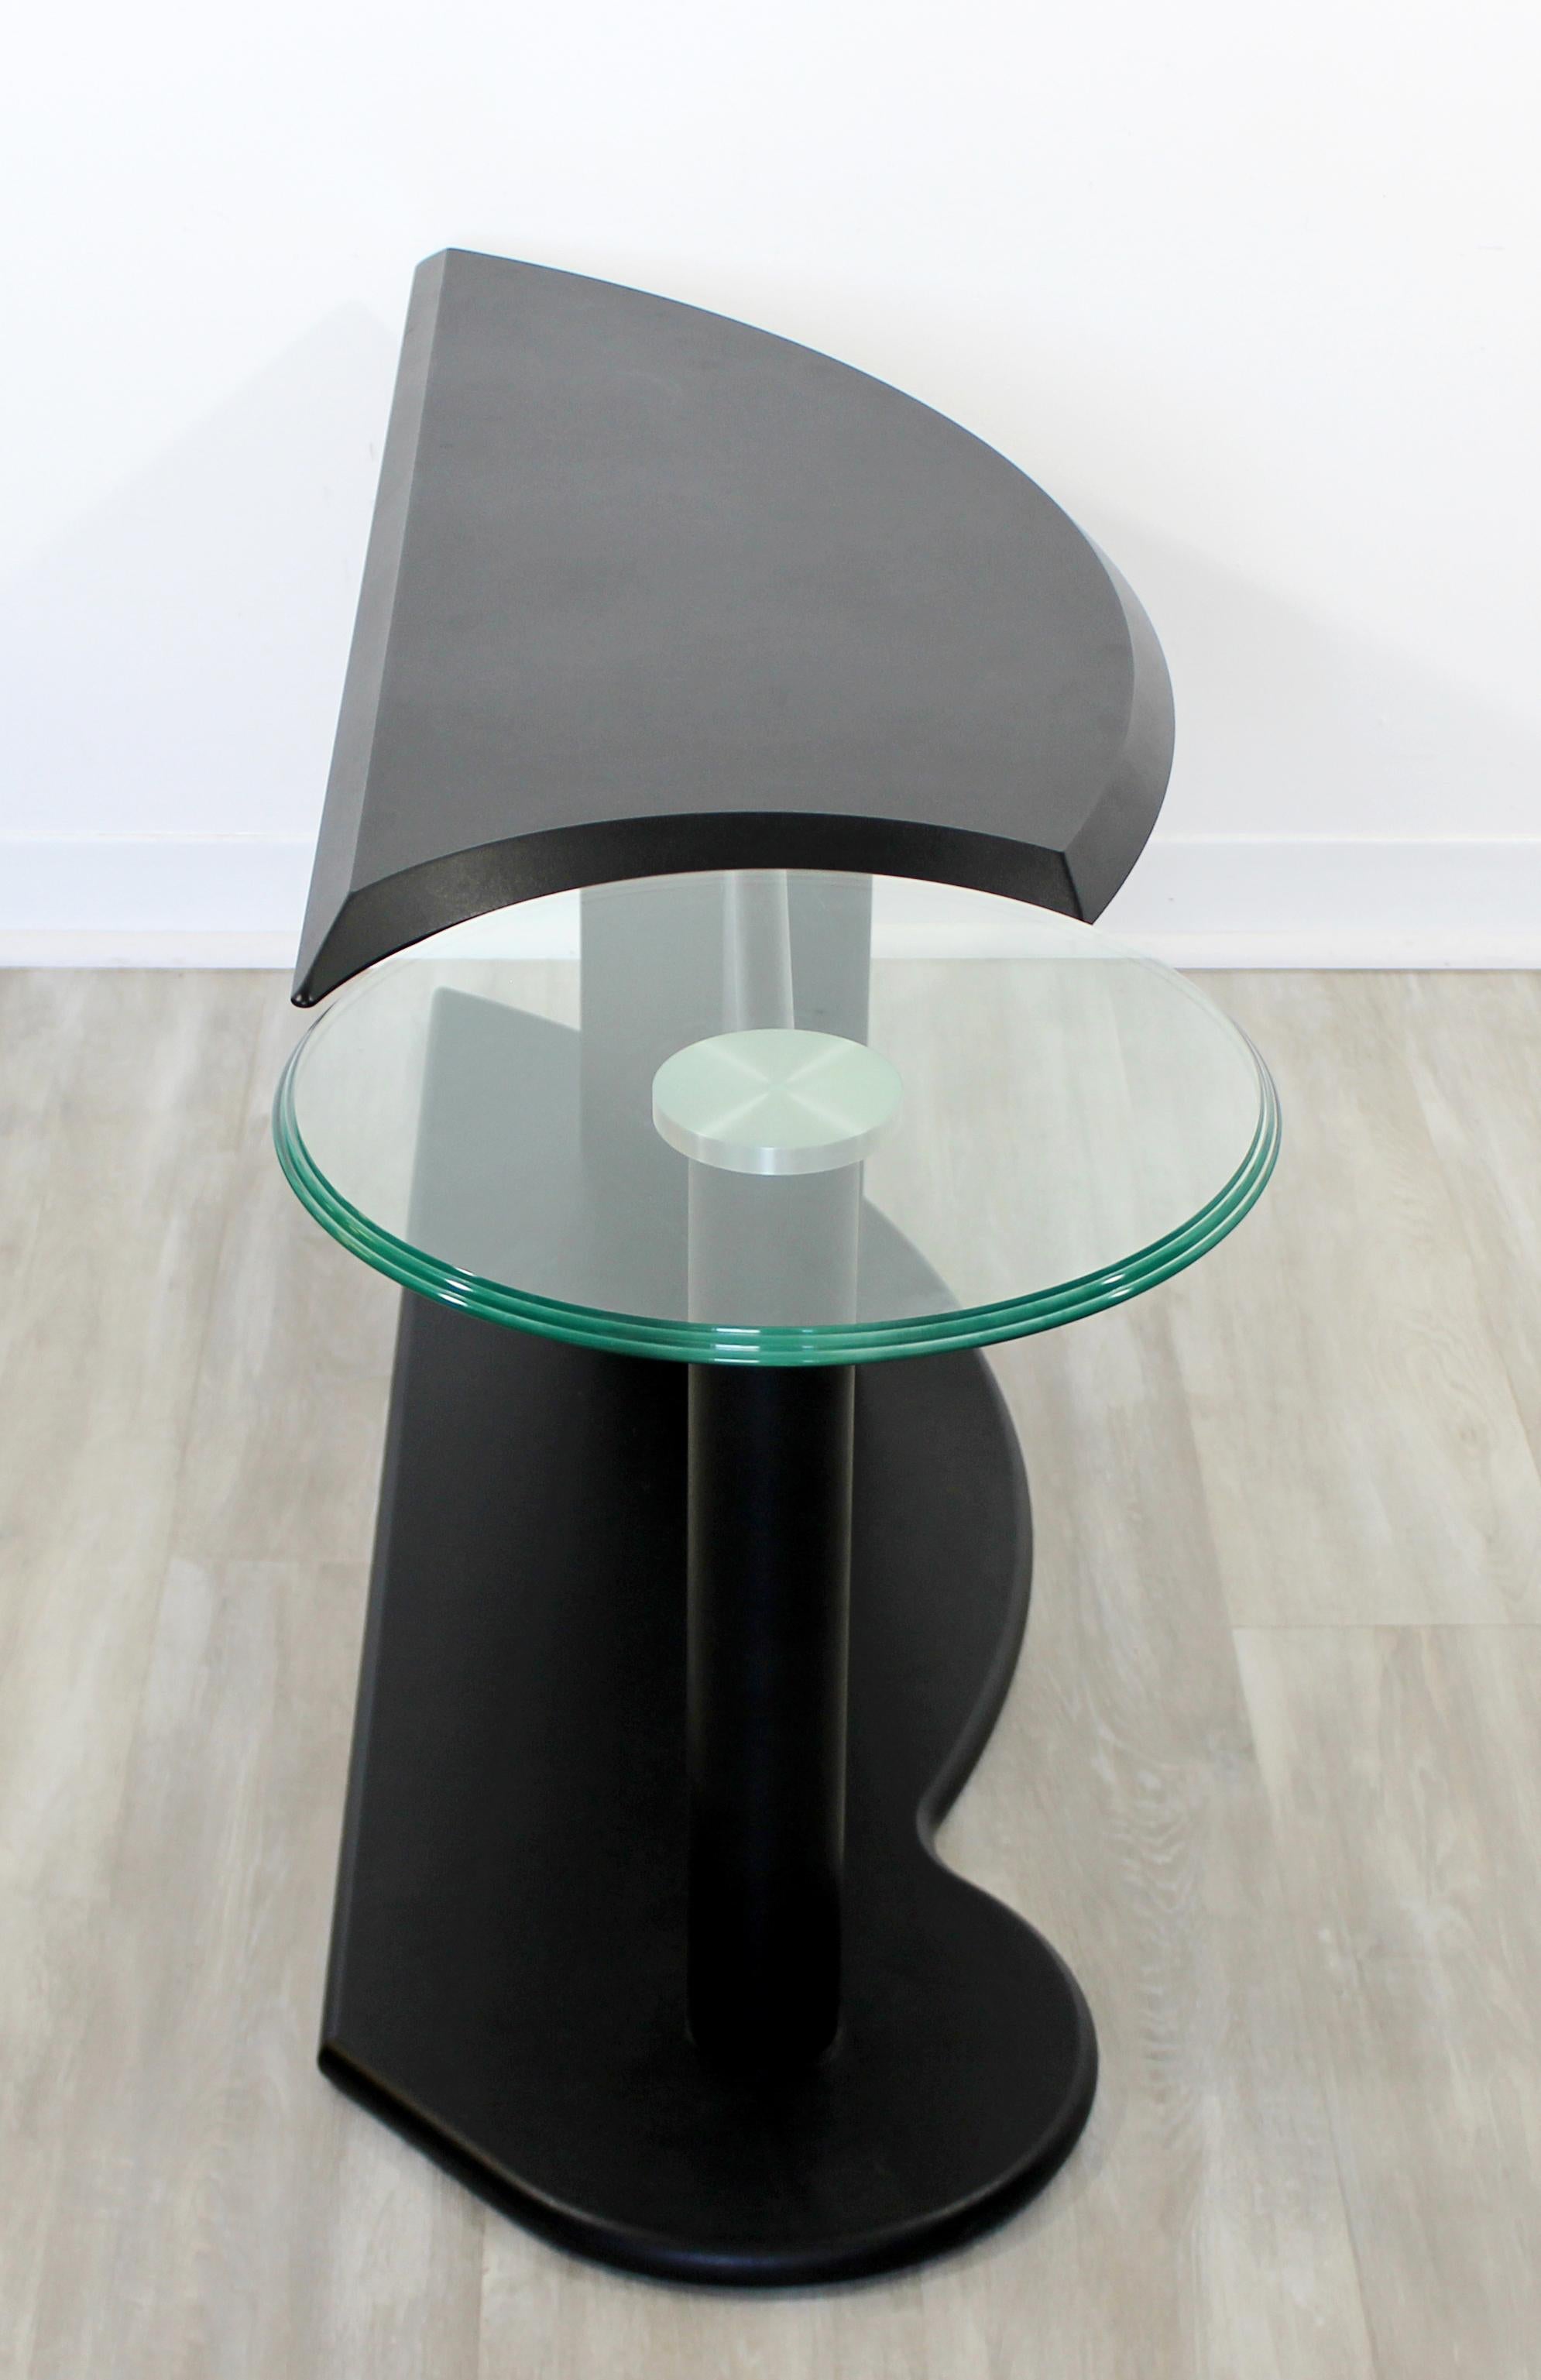 Late 20th Century Contemporary Modern Cassina Black Metal Chrome & Glass Accent Table 1970s Italy